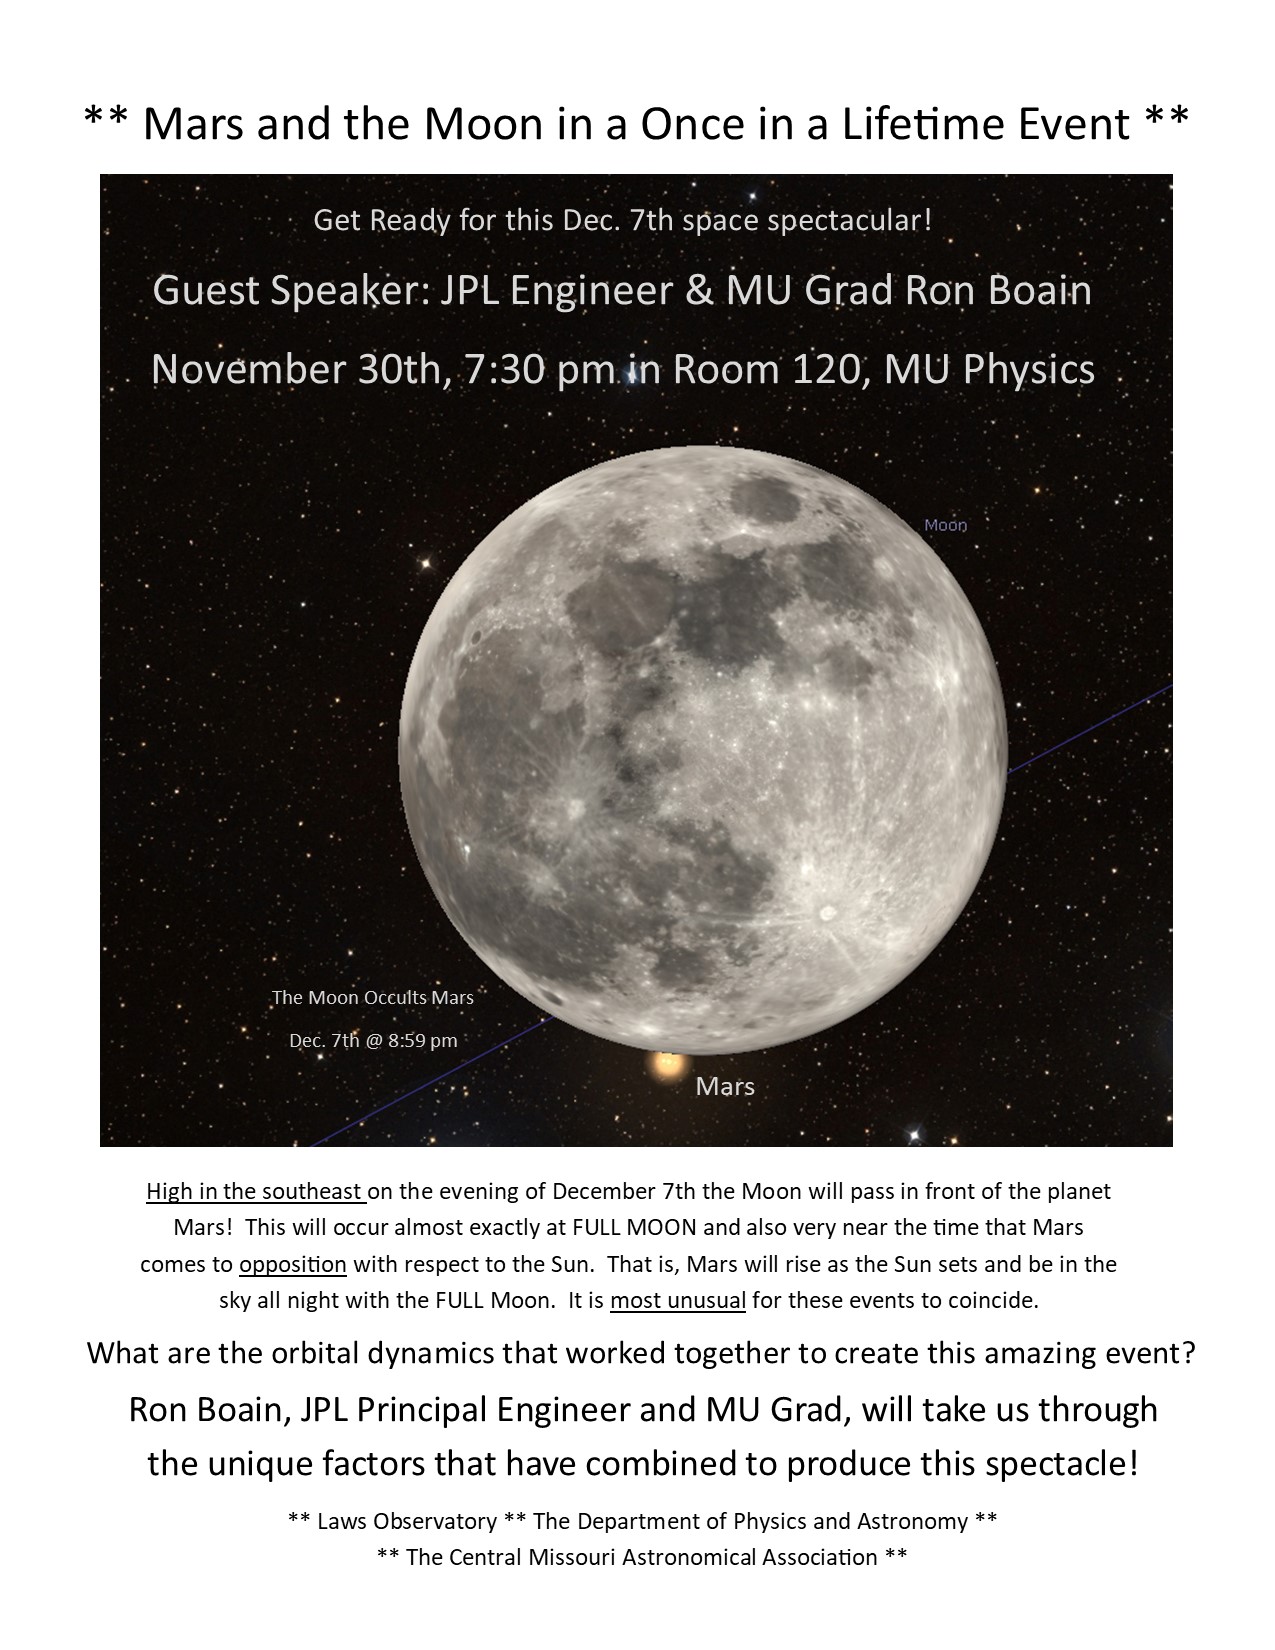 Public Lecture by Ron Boain on the Upcoming Lunar Occultation of Mars